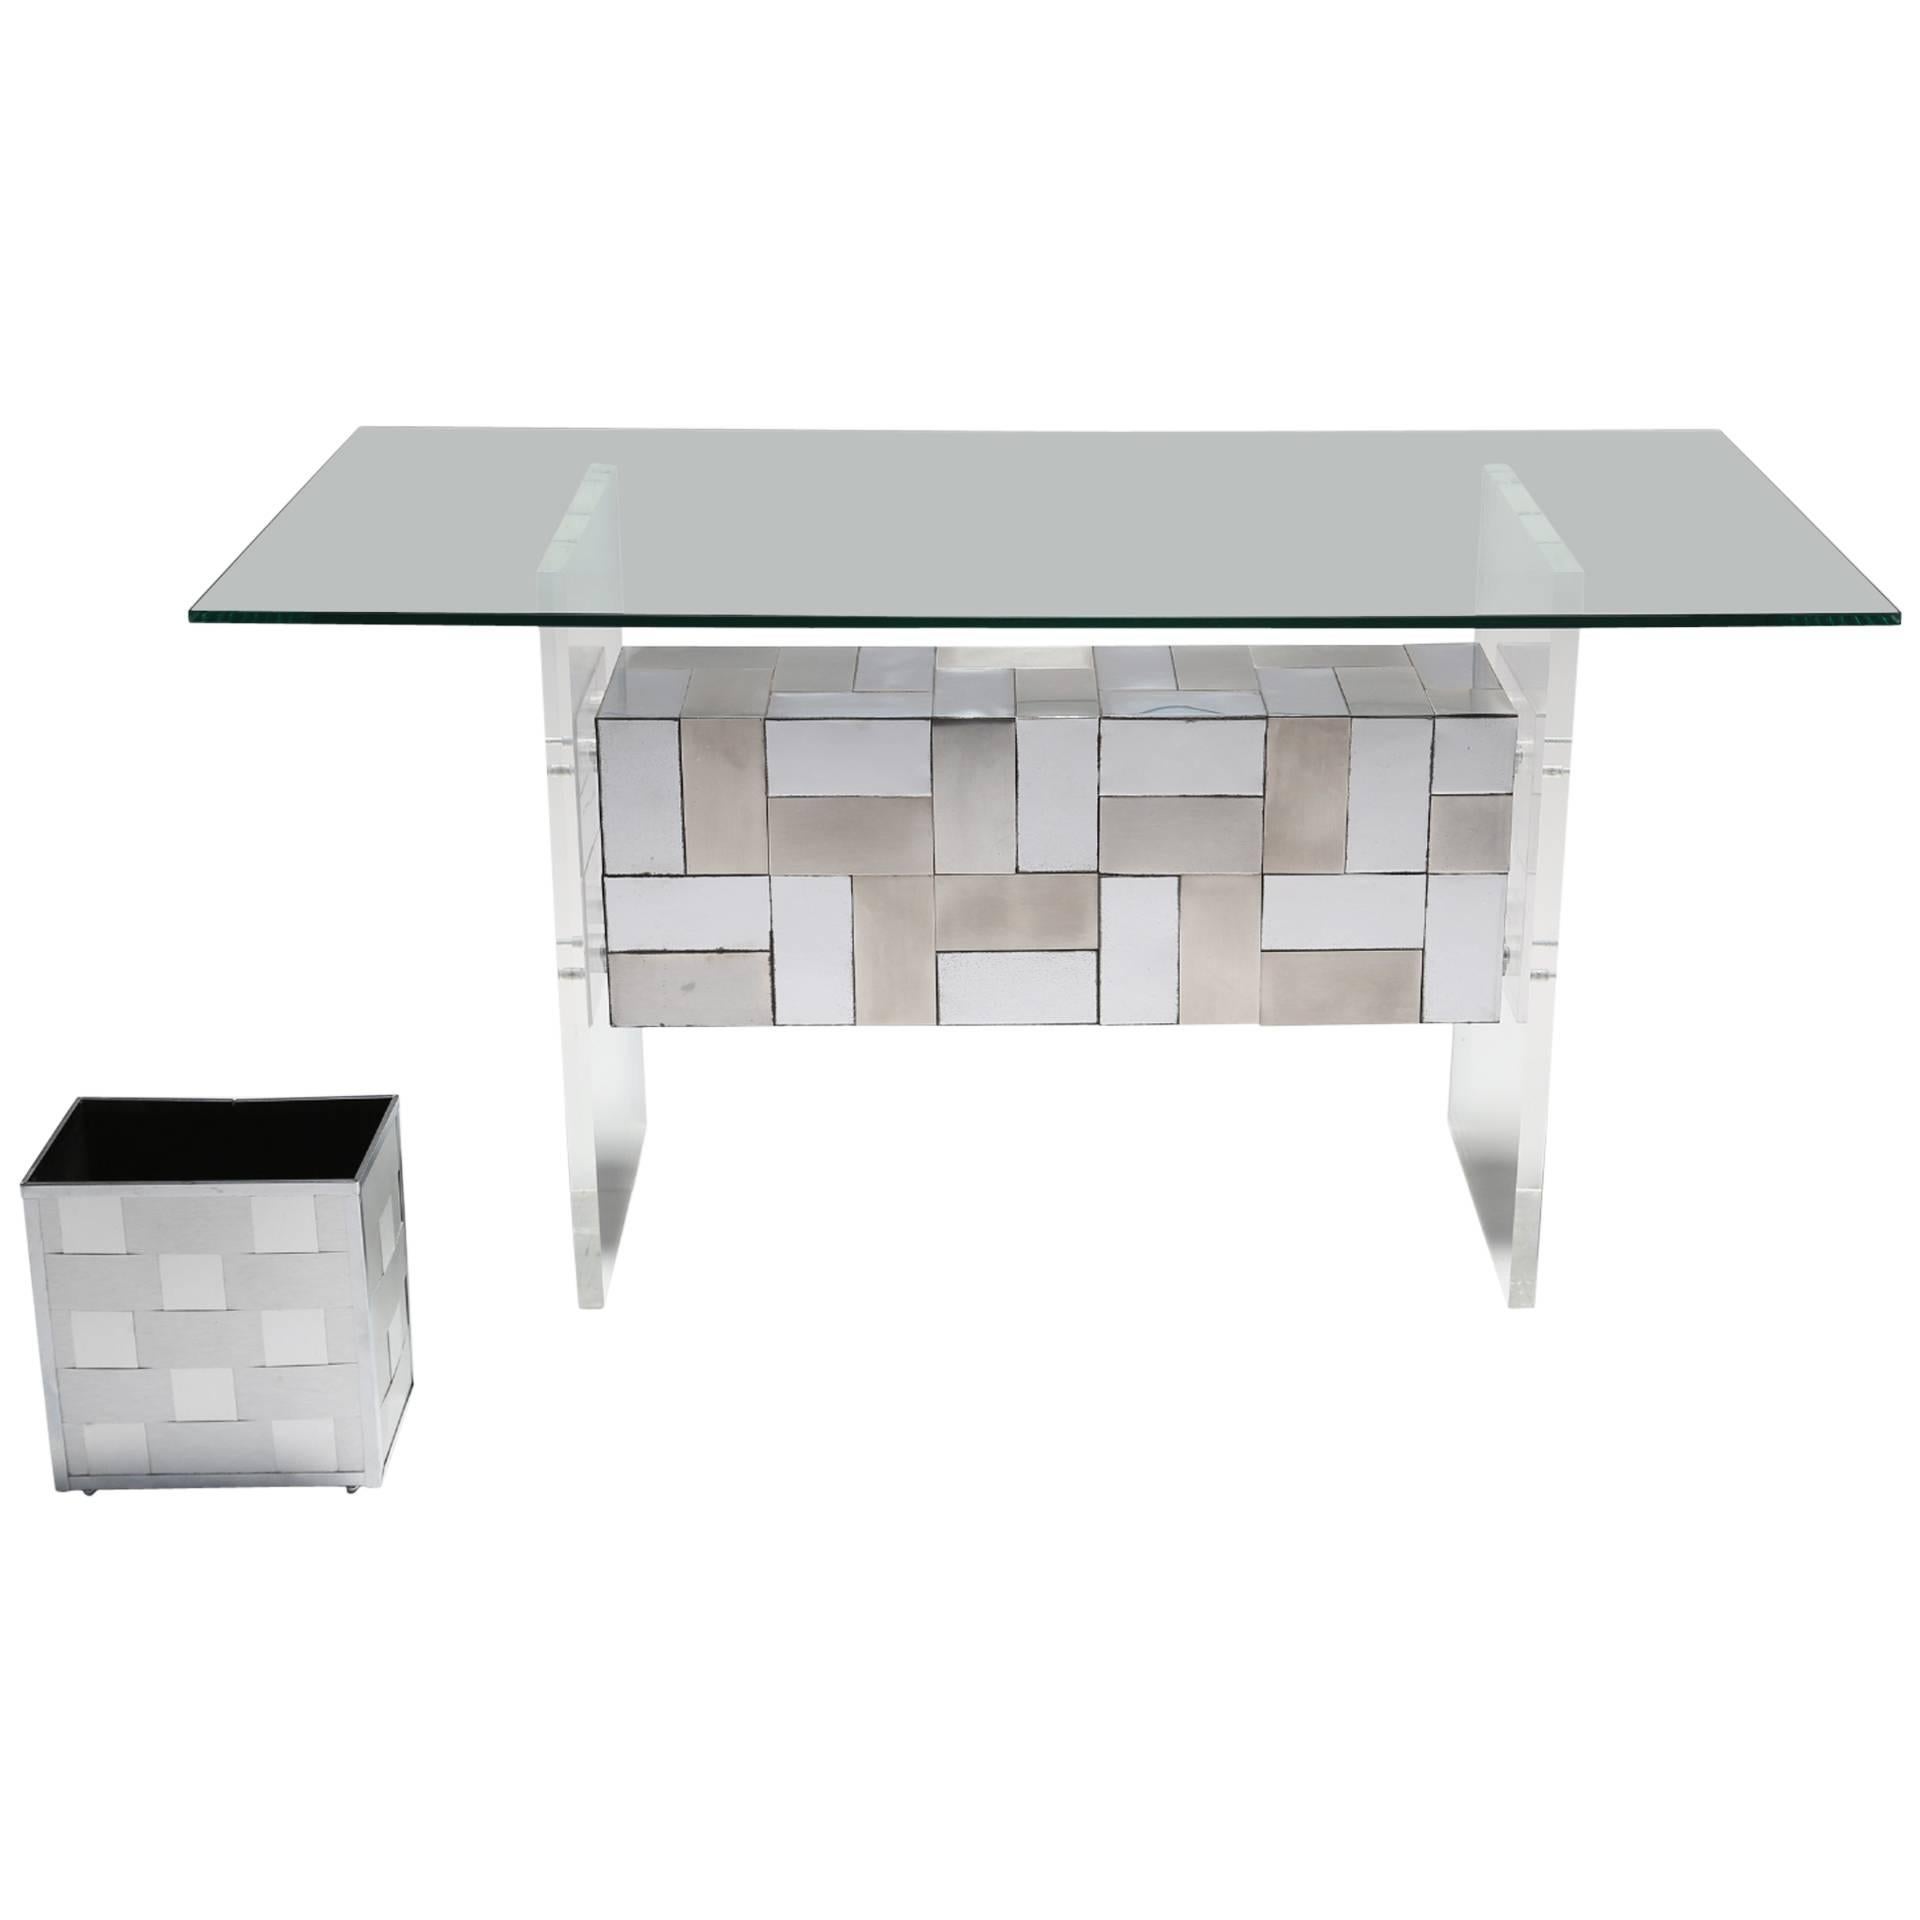 Paul Evans style patchwork chrome desk, vanity or dining table base.